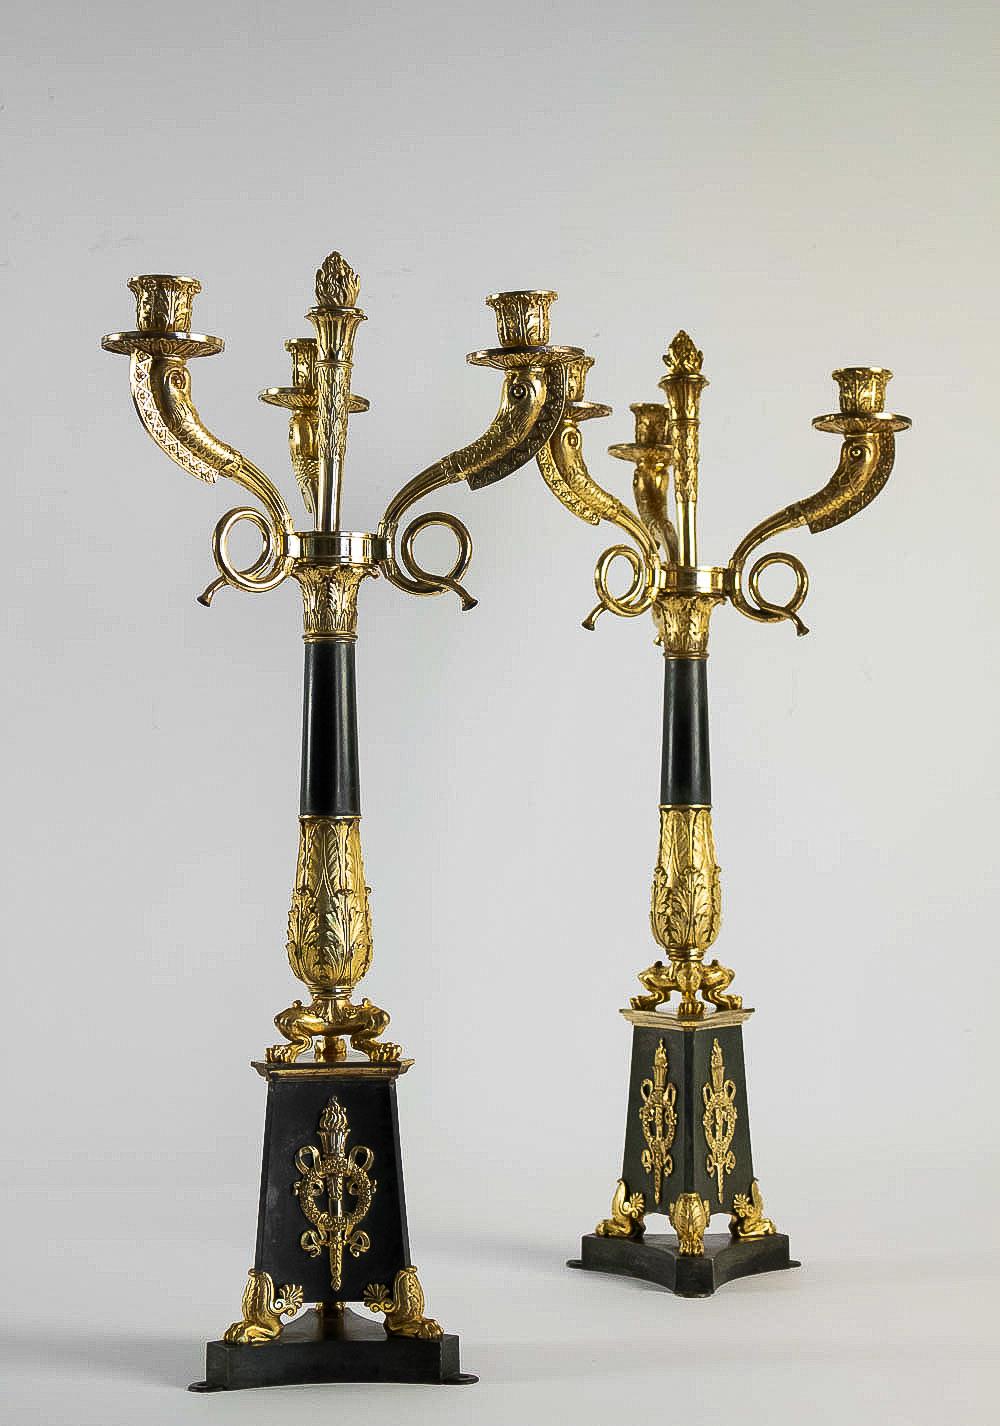 Large Pair of French Empire or Restauration Period Candelabra, circa 1815-1830 For Sale 9